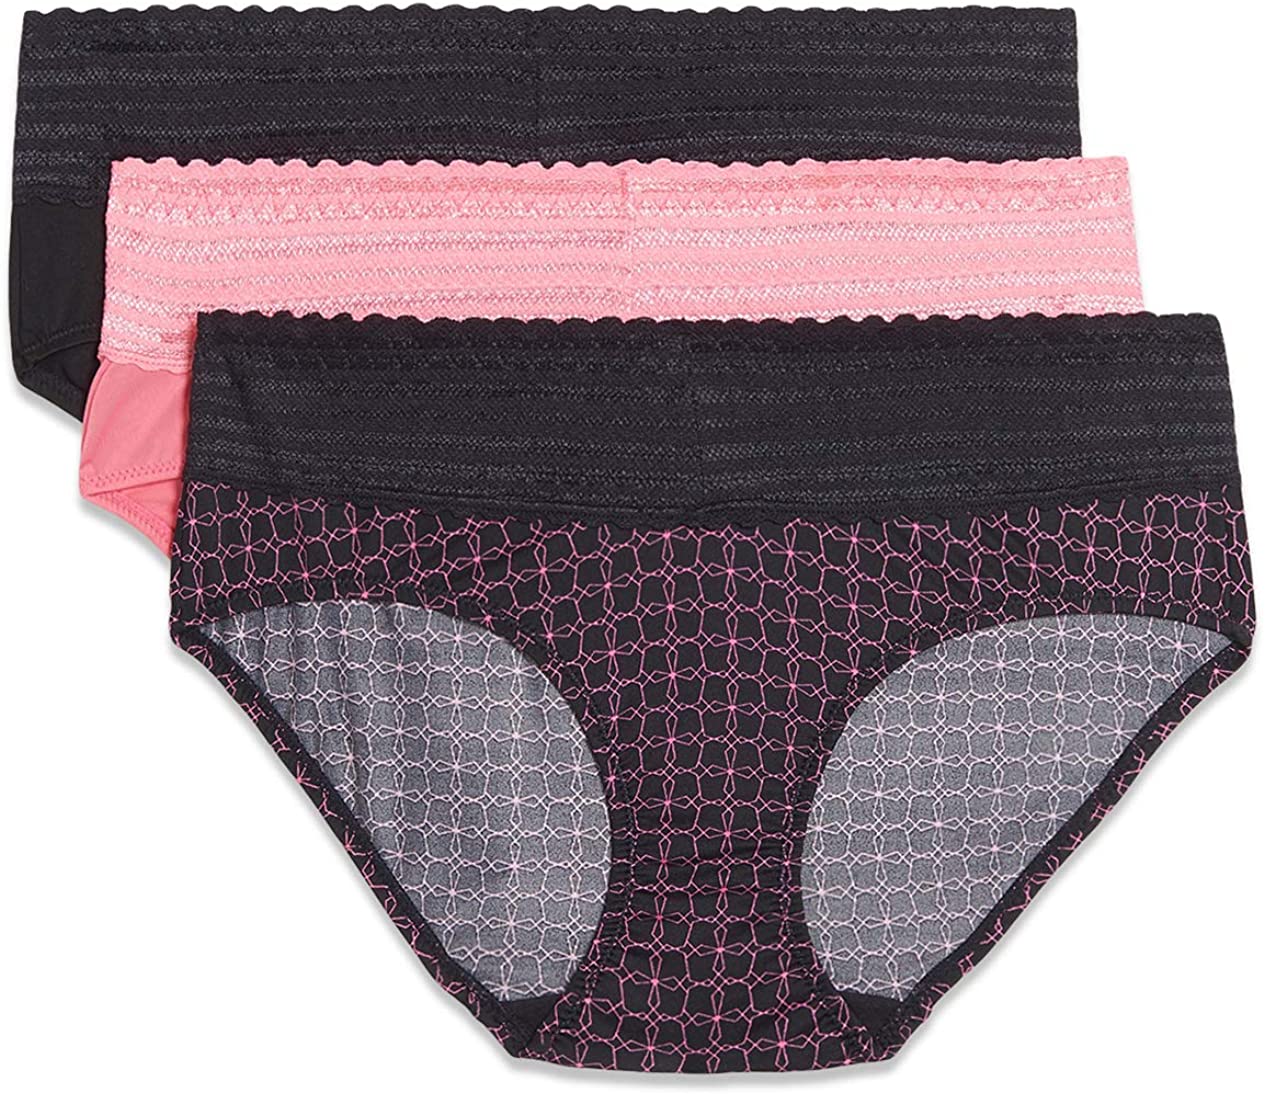 Warner's Women's Blissful Benefits No Muffin Top 3 Pack Hipster